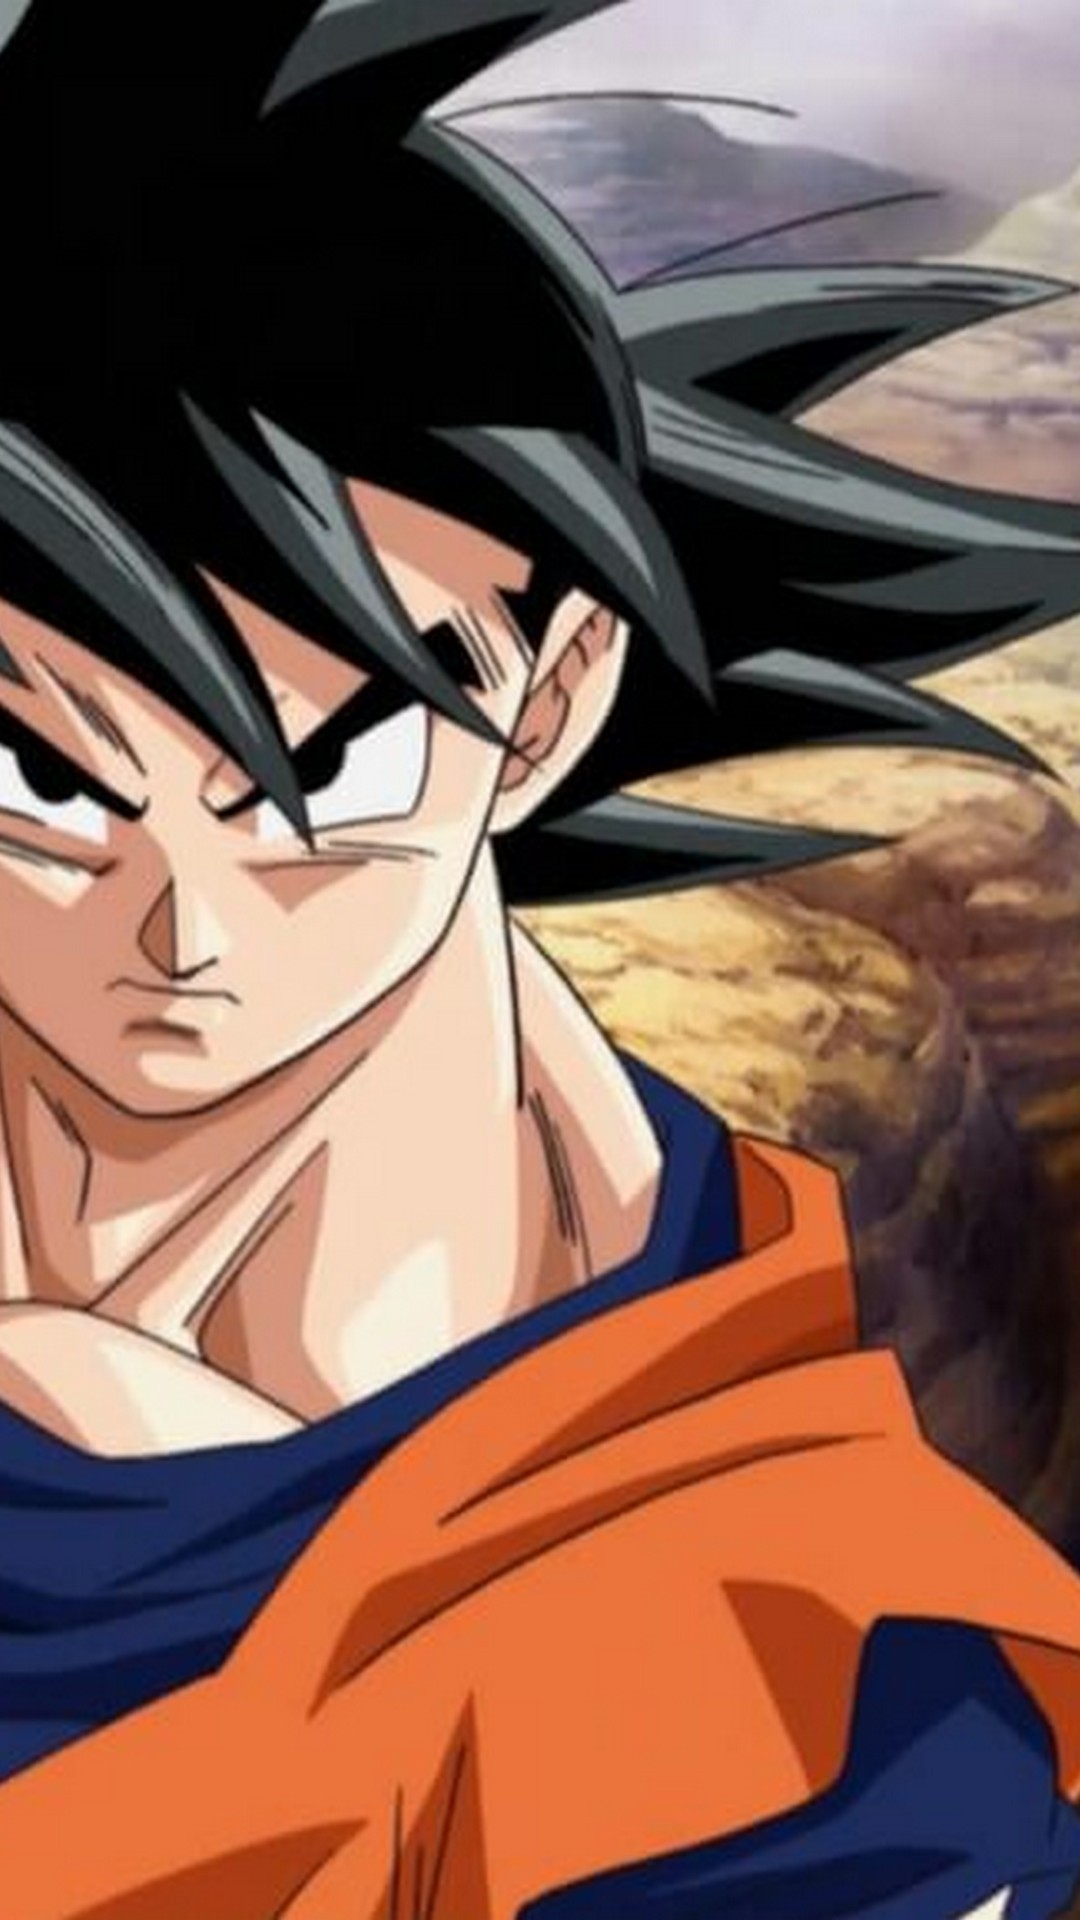 Android Wallpaper Hd Goku Images With Hd Resolution - High Resolution Anime Wallpaper Hd For Android , HD Wallpaper & Backgrounds